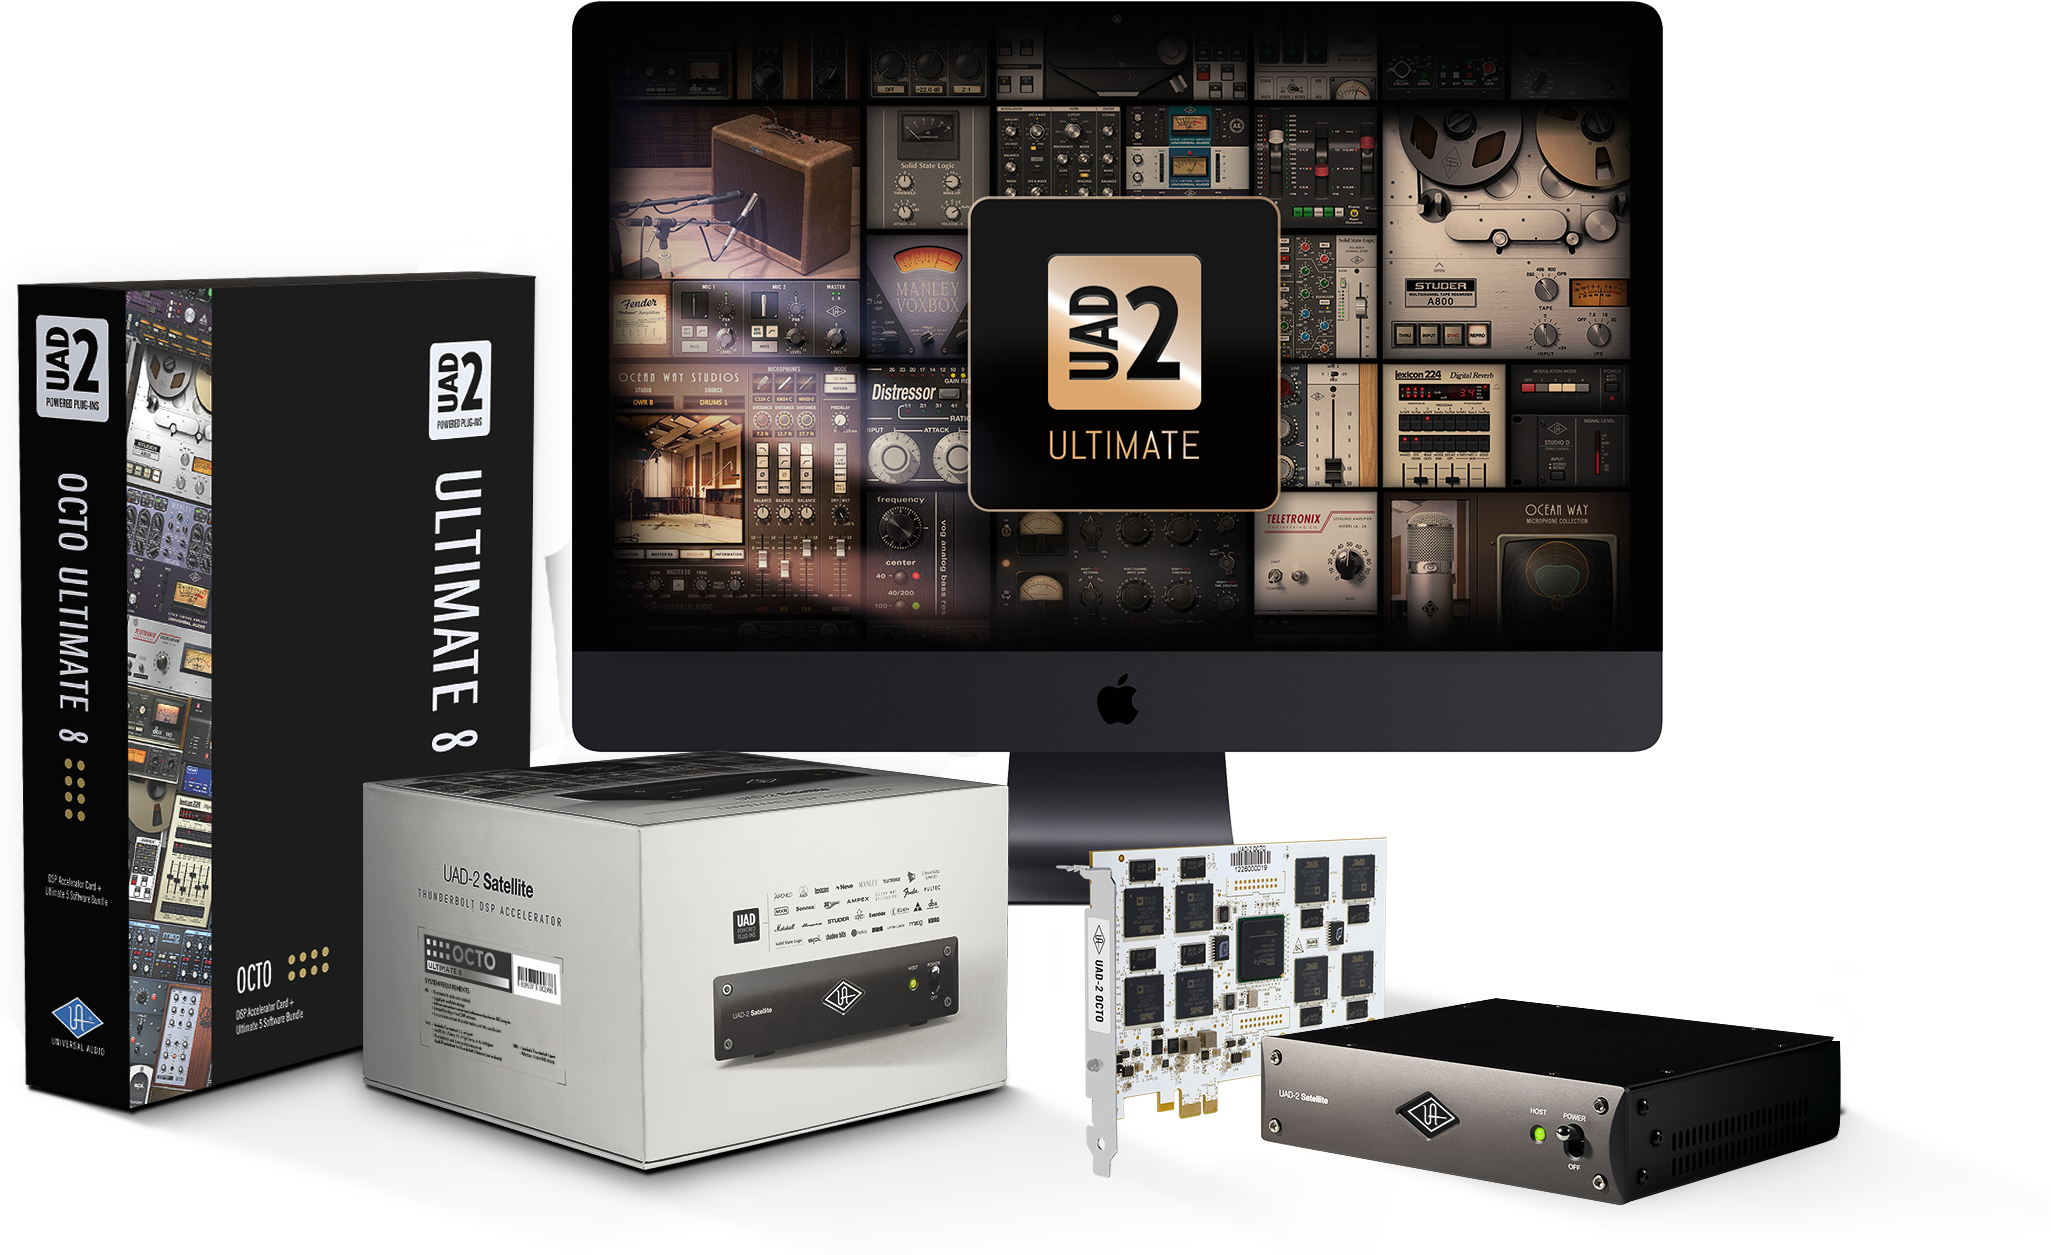 Universal Audio Uad-2 Octo Ultimate 8 Pcie - Others formats (madi, dante, pci...) - Main picture